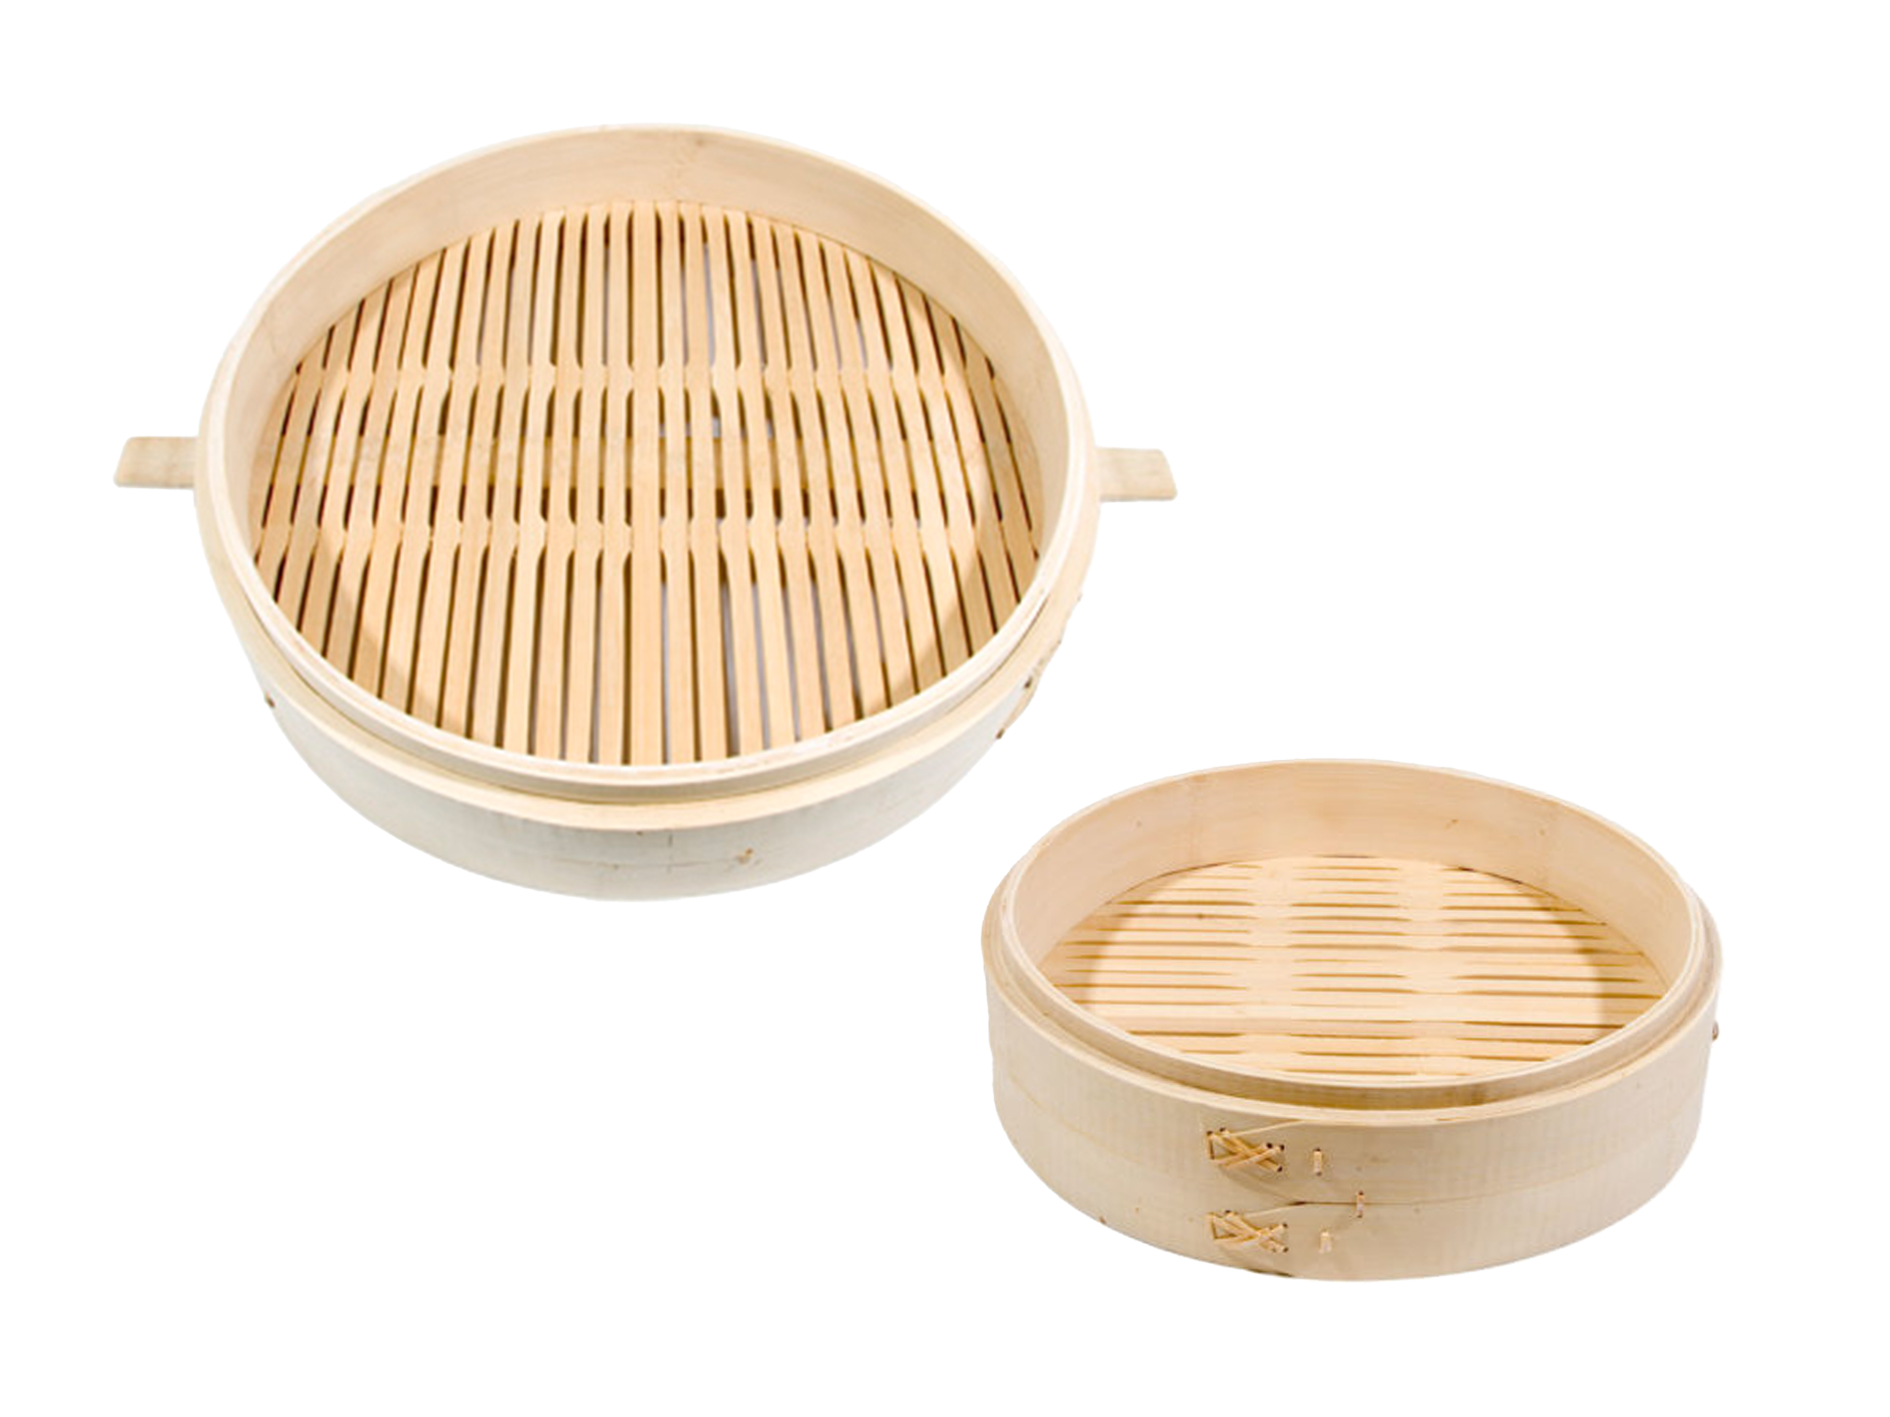 Bamboo Steamer Base - Town Food Service Equipment Co., Inc.